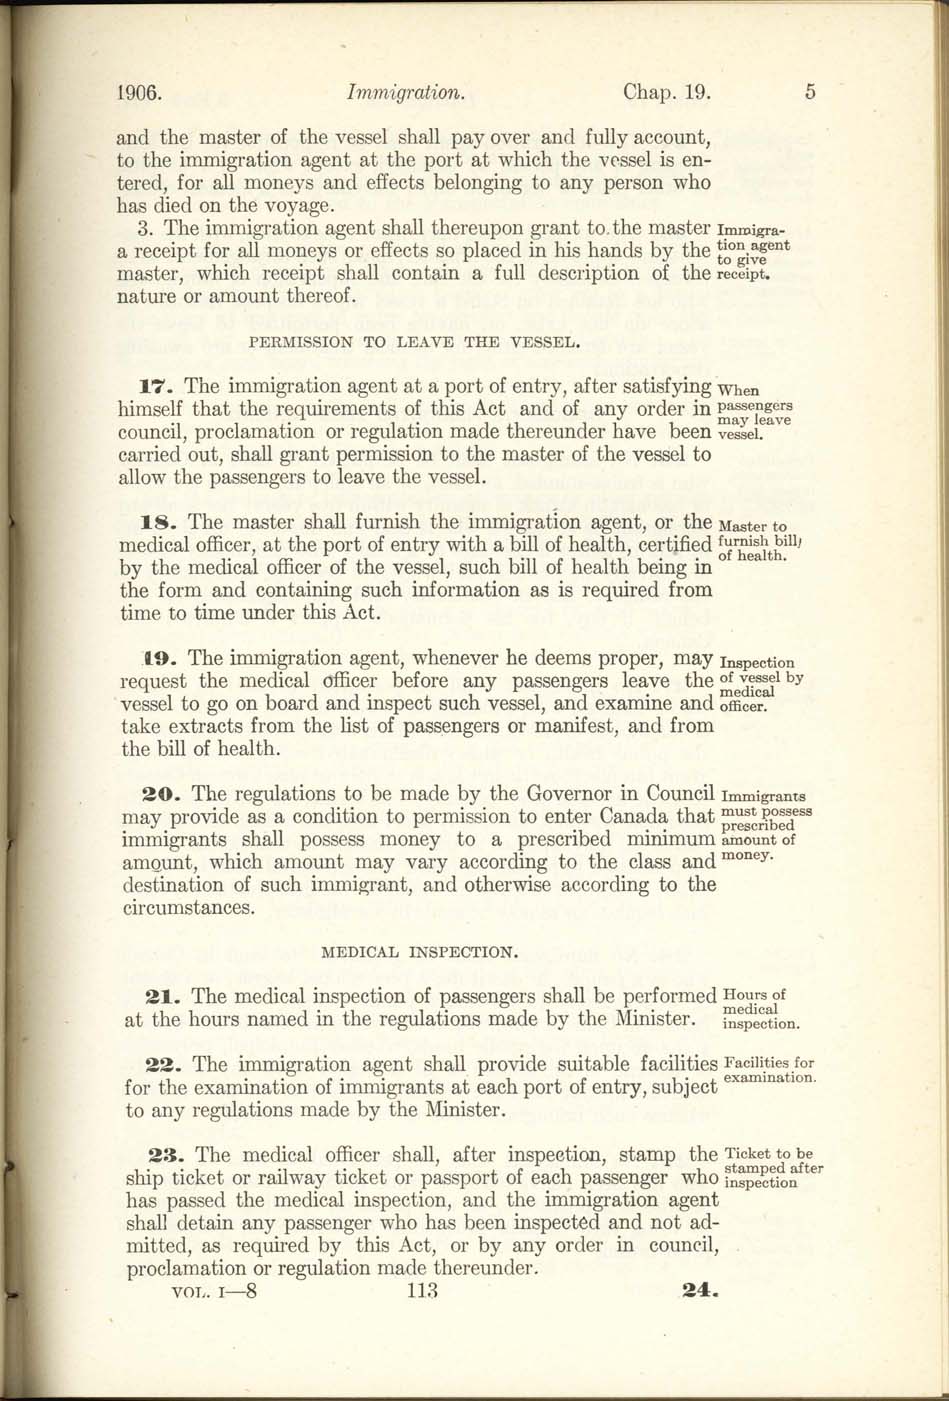 Chap. 19 Page 113 Immigration Act, 1906